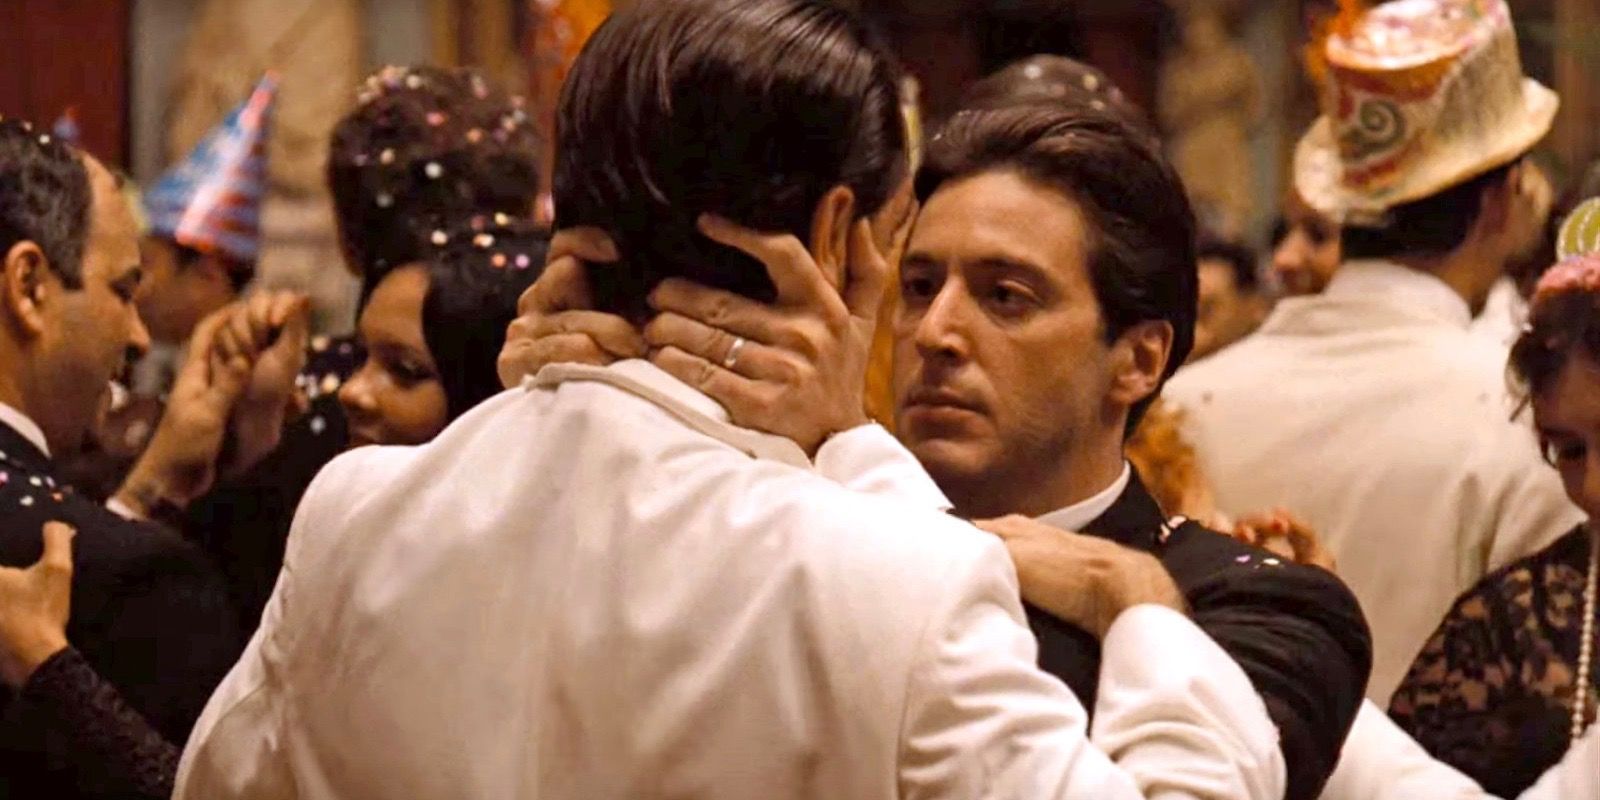 Michael kissing his friend in The Godfather Part 2